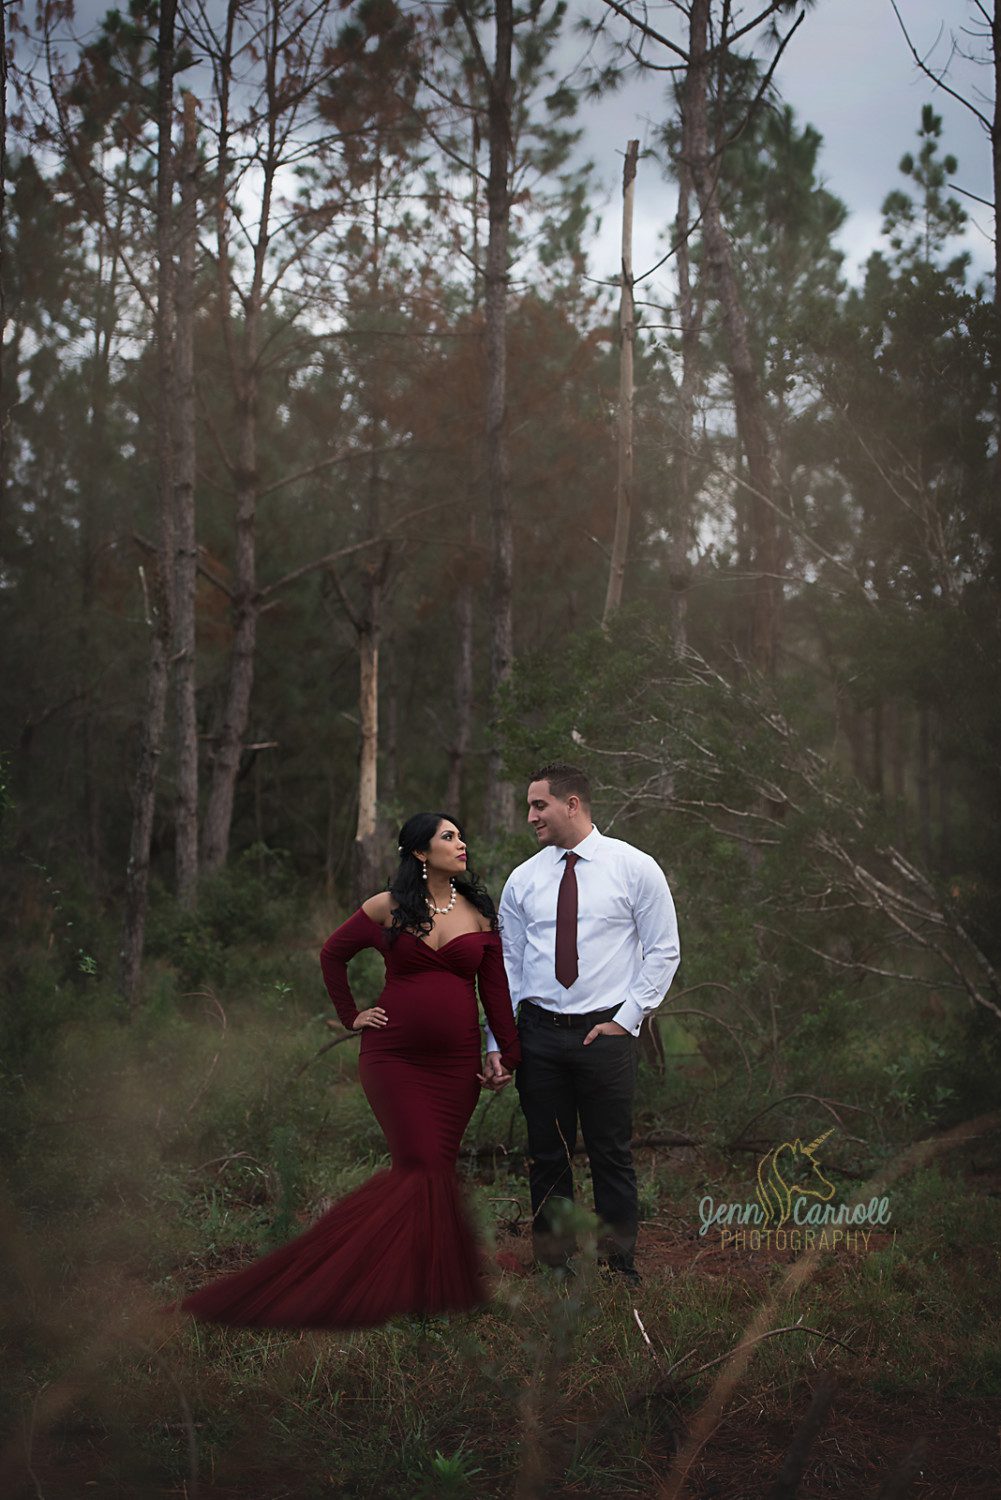 Jenn Carroll Photography, Jenn Carroll, New Tampa, Maternity Session, Maroon Gown, Sew Trendy Accessories, Maternity Gown, tulle, woods, glam, maternity, couples, dark and moody, sunflare, Florida, maternity photographer, maternity photography, tampa photographer, zephyrhills, wesley chapel, photographer, photography, zephyrhills photographer